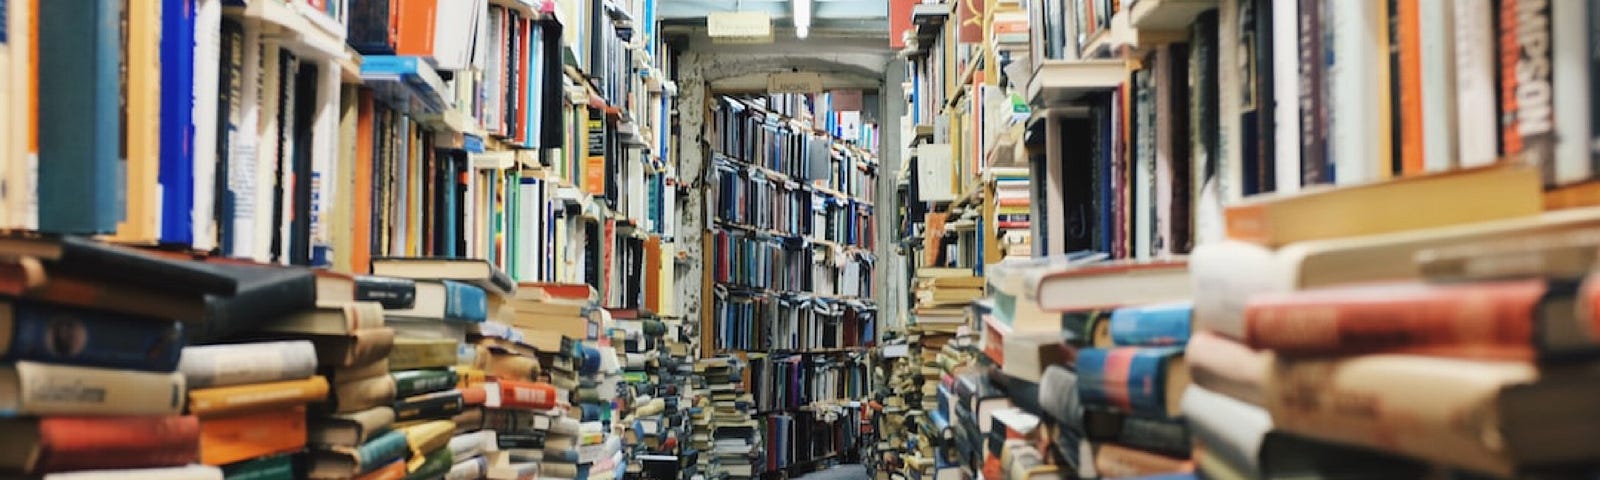 A library or bookstore with stacks of old books in messy piles.